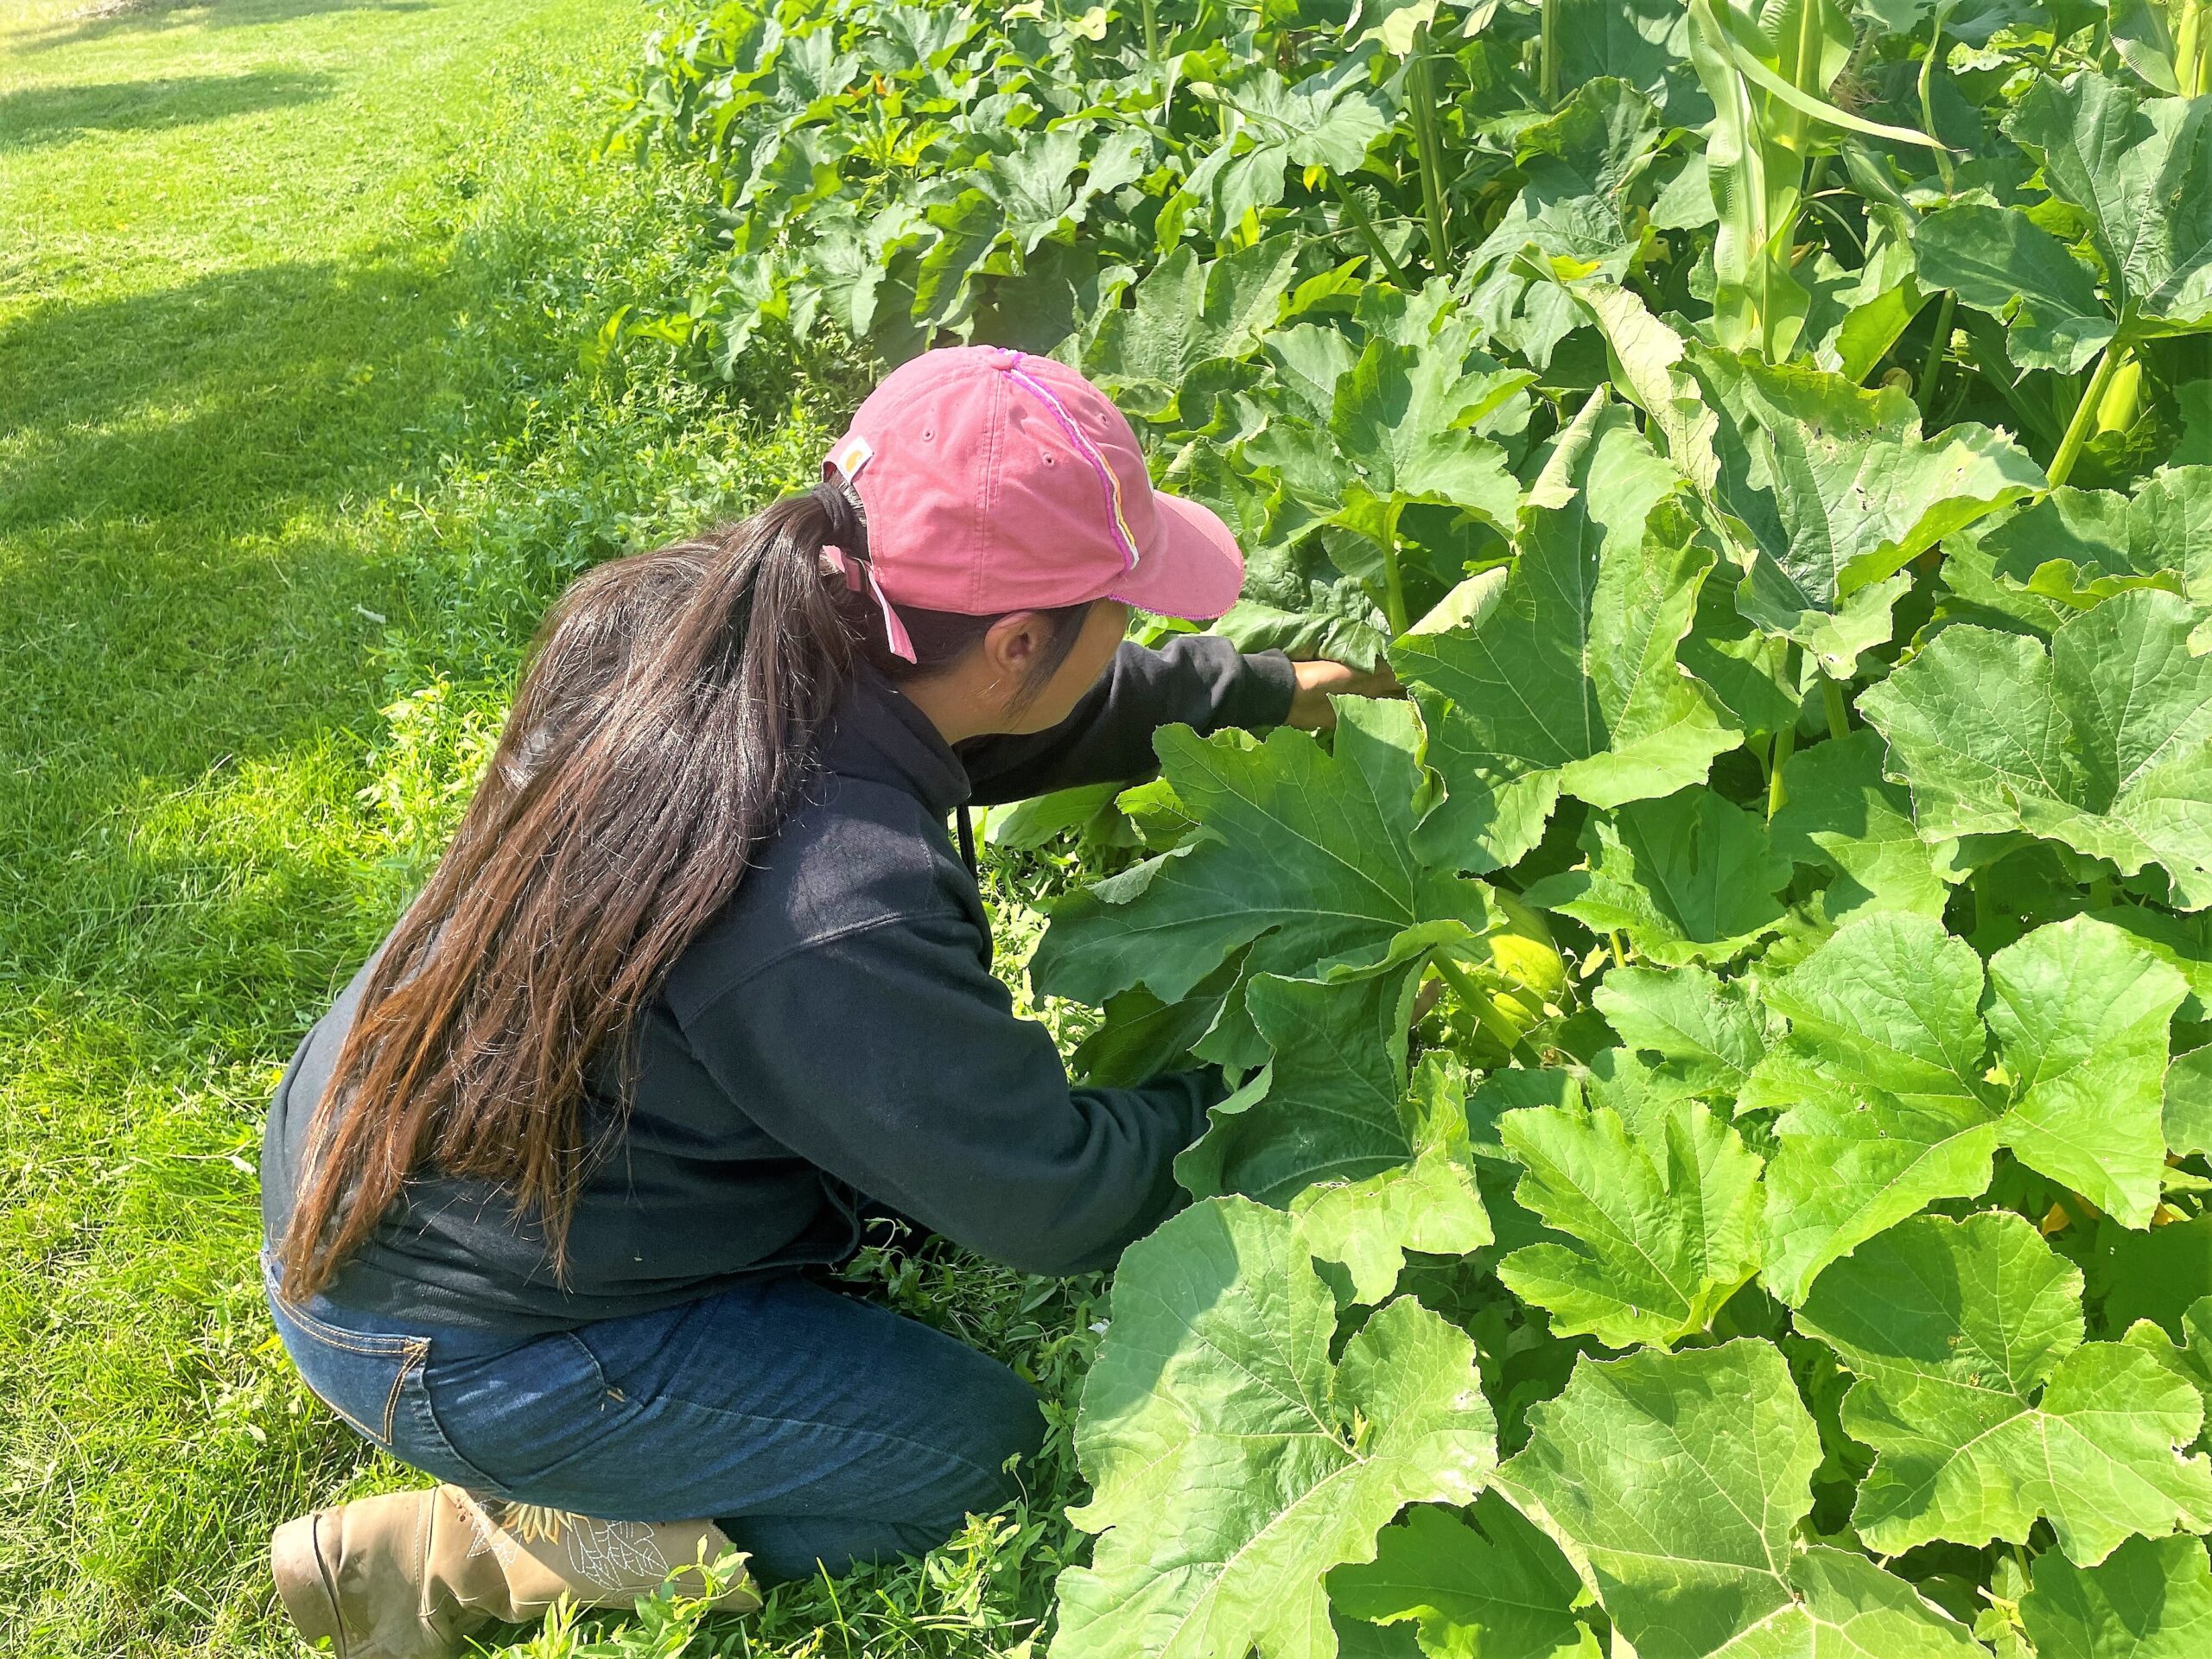 Emily Running Hawk tends to squash growing in the Dragonfly Garden at United Tribes Technical College. Photo by Adrianna Adame